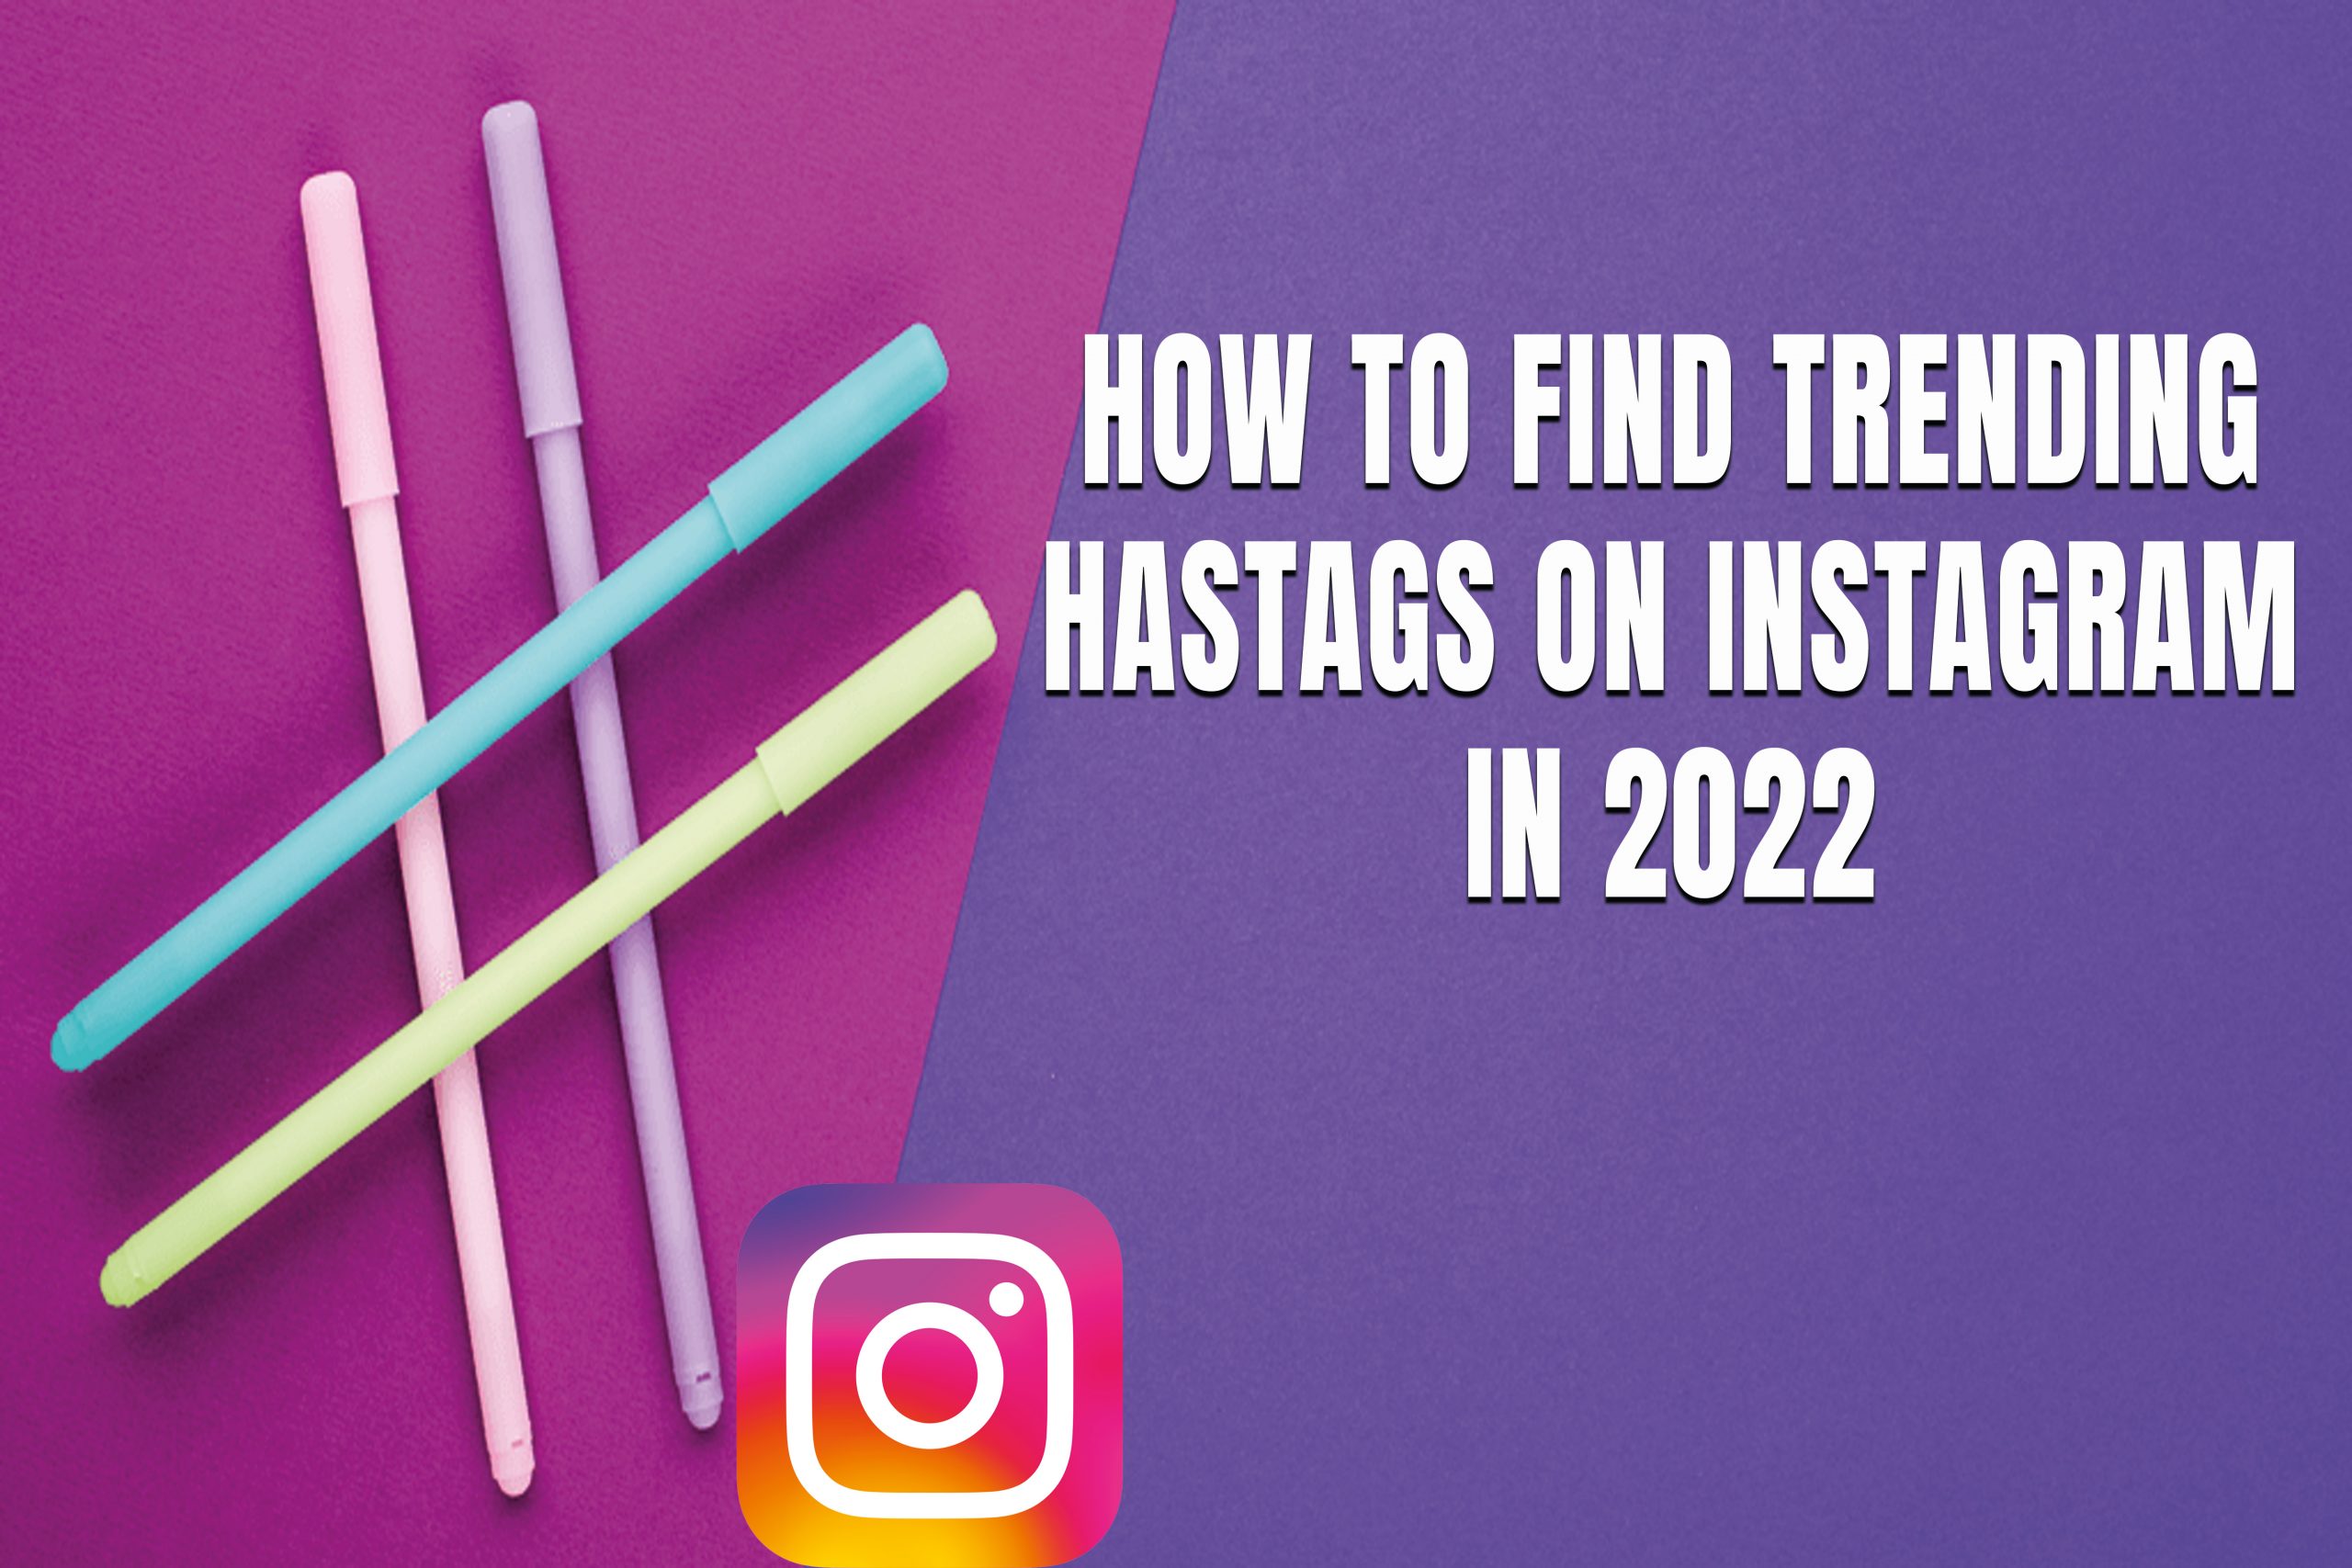 How to find trending hashtags on Instagram in 2022?